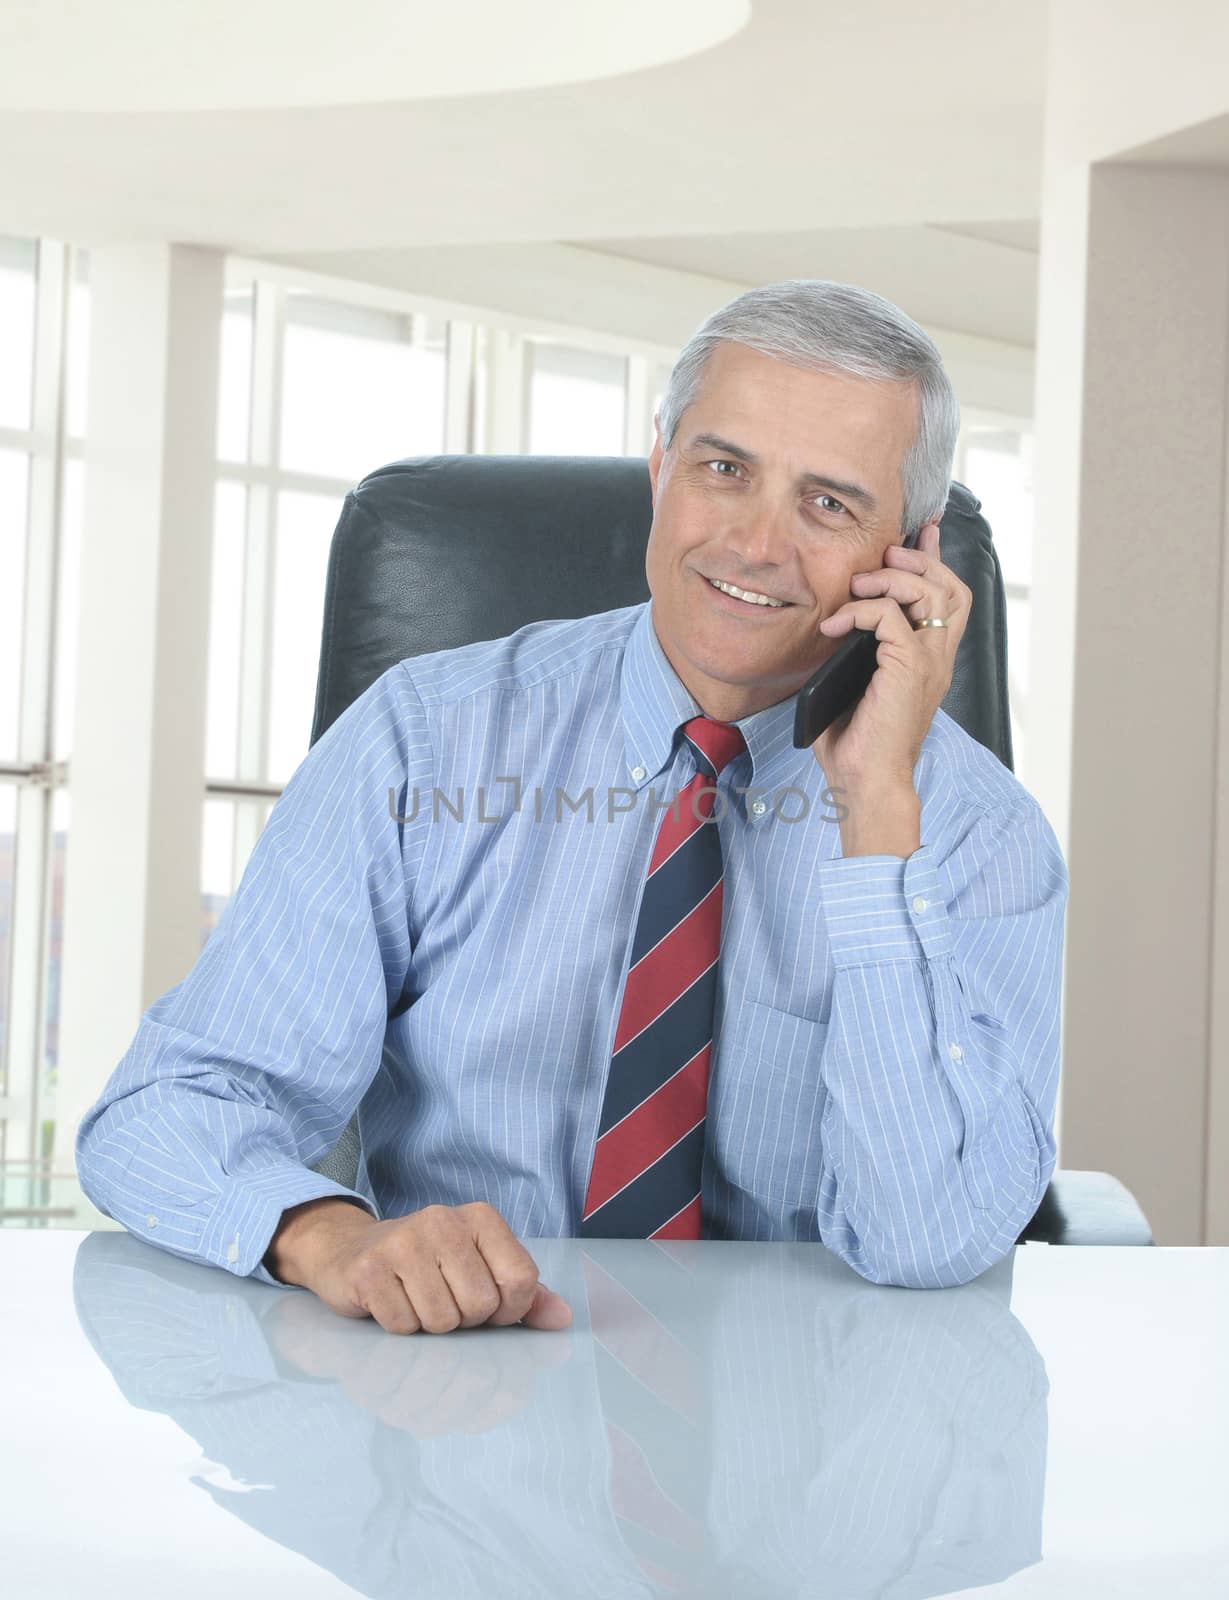 Middle aged businessman seated at his desk in modern office talking on his cell phone. Vertical format with man reflection in desk.